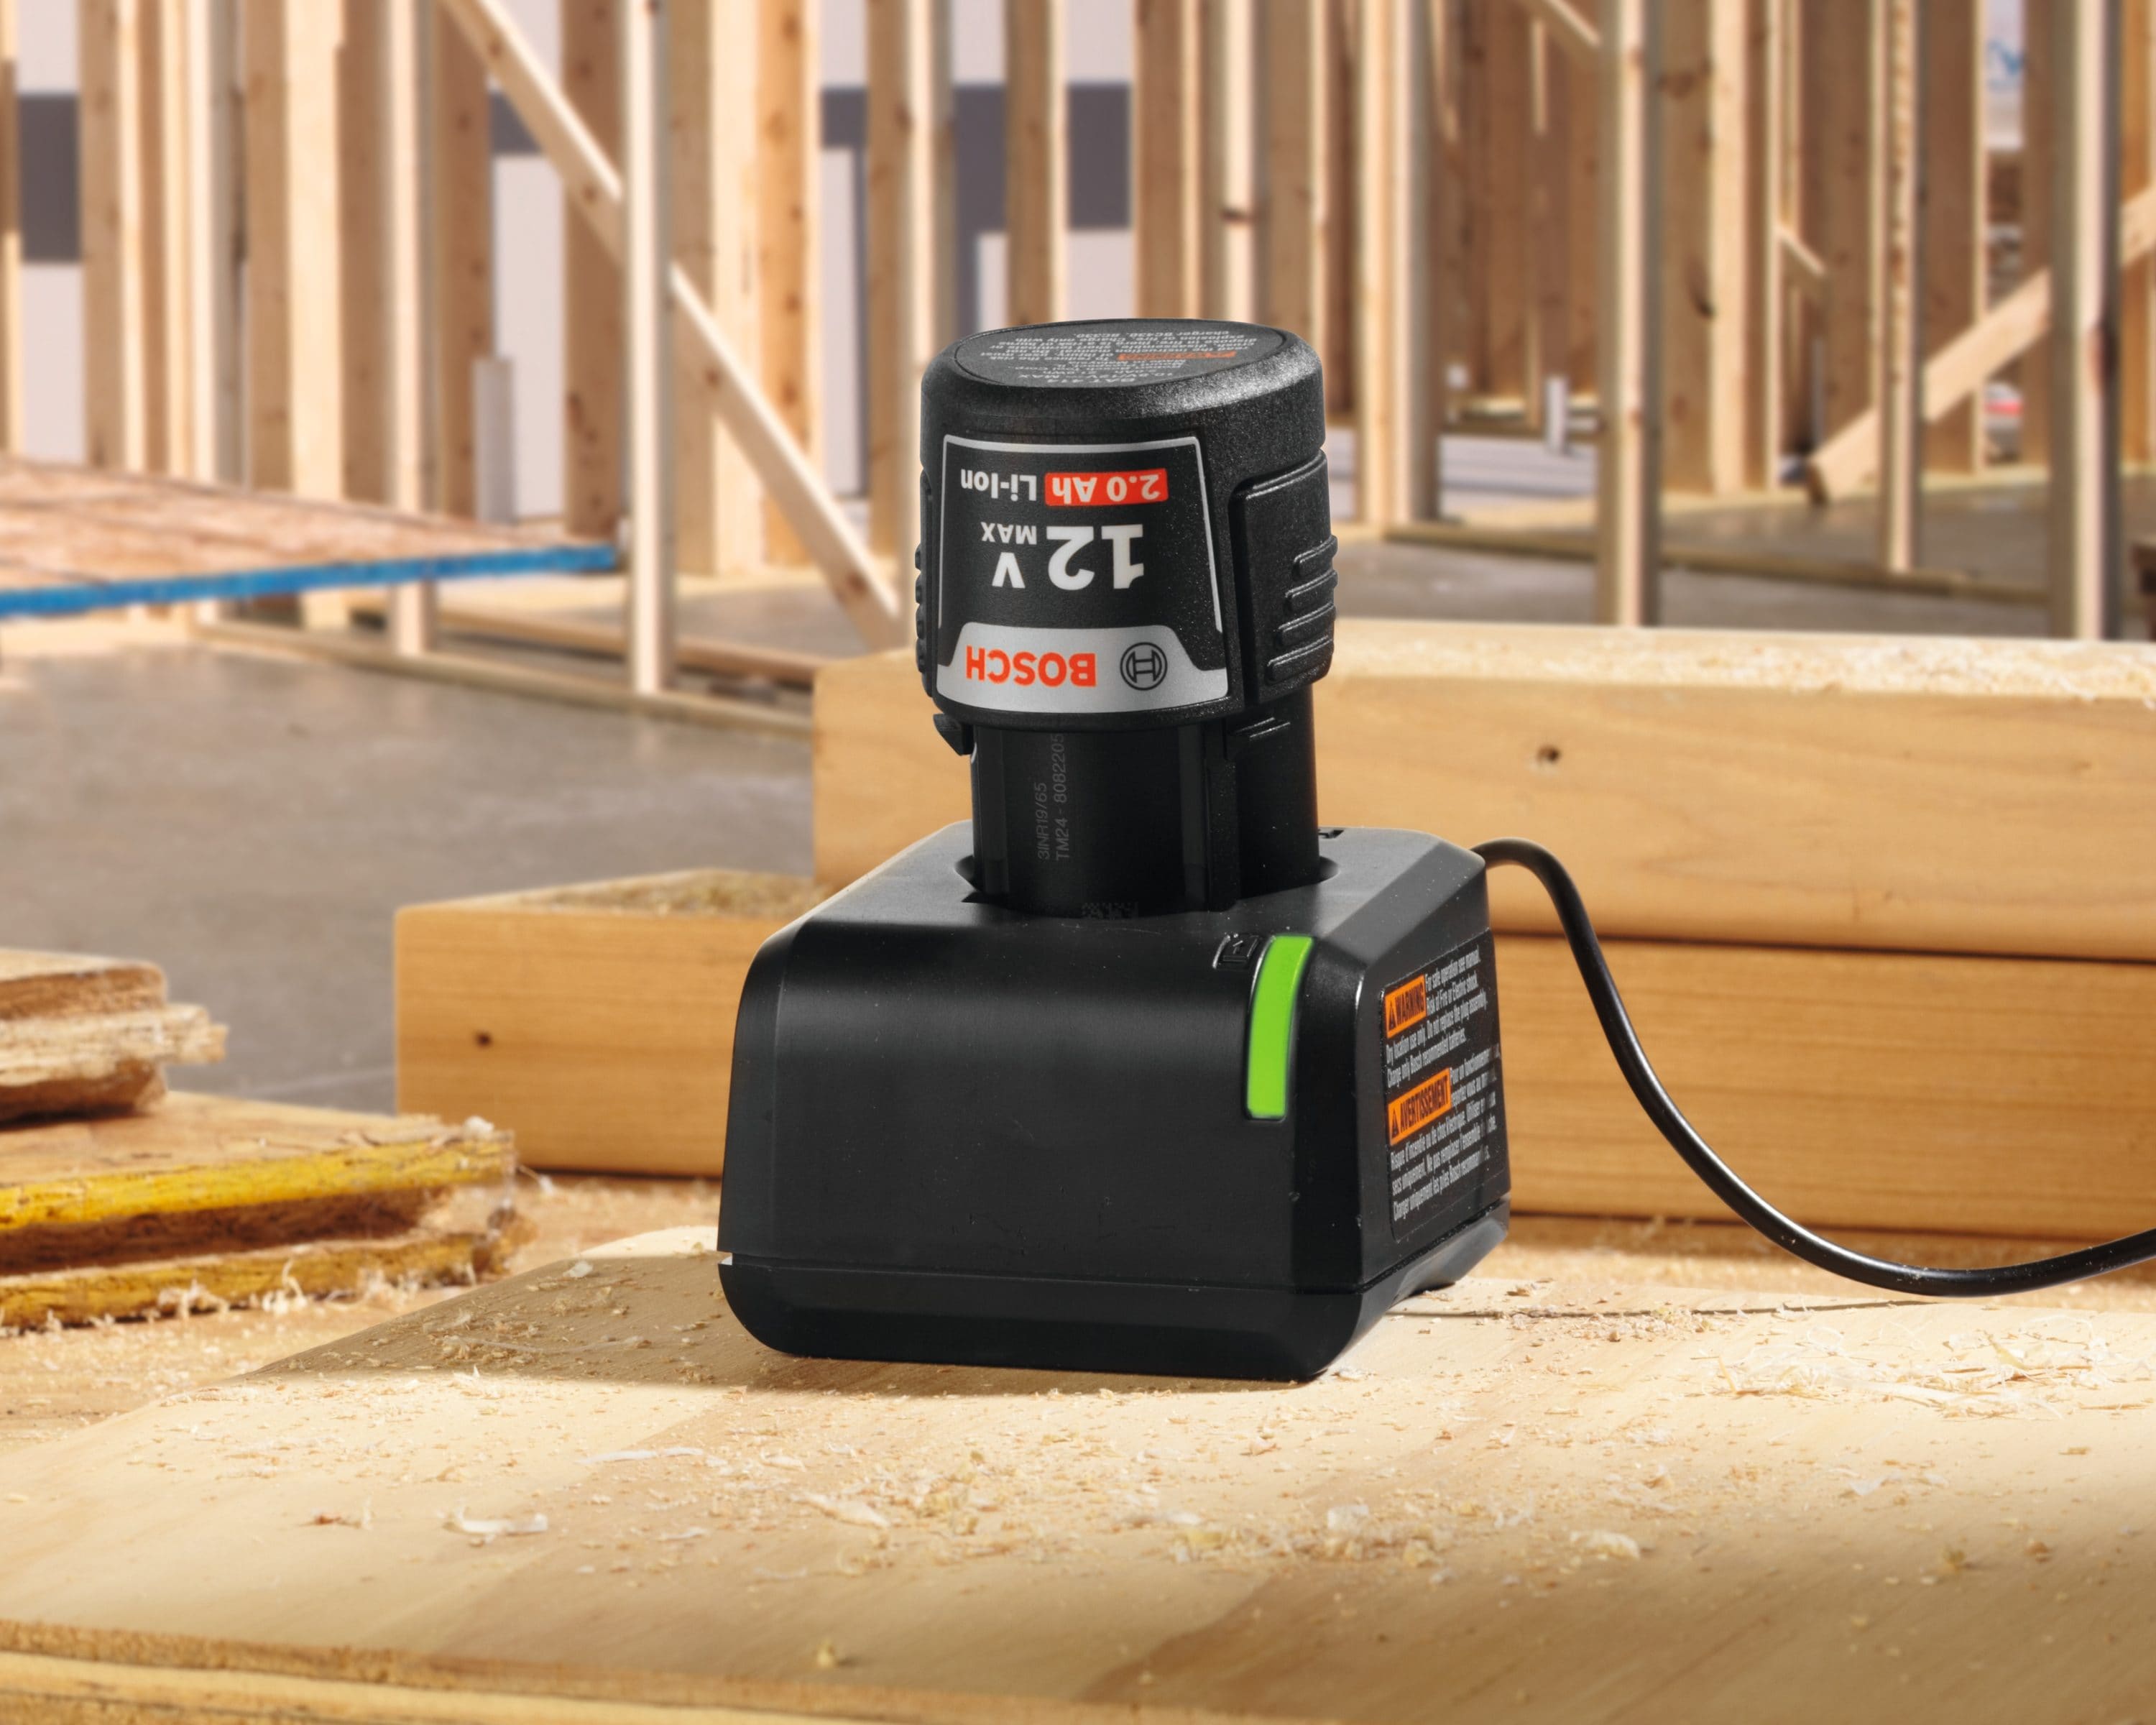 Buy Bosch Home and Garden 12V 2.5 Ah Lithium-Ion Battery